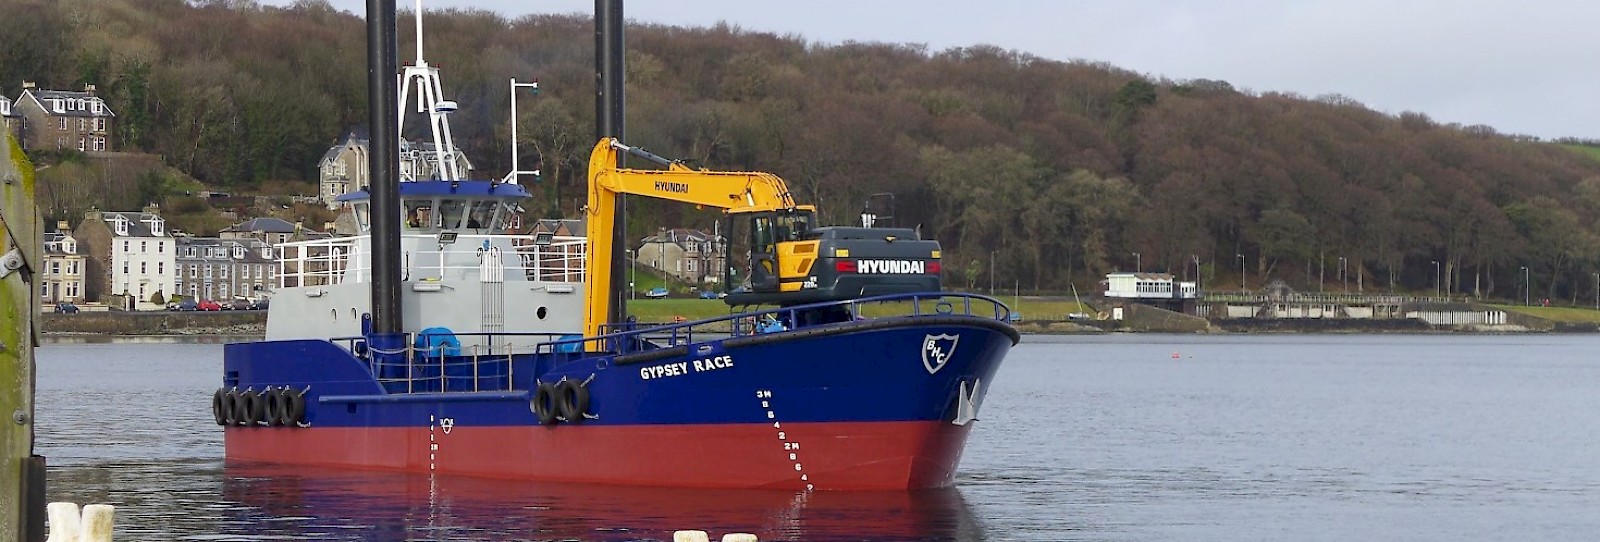 A smart looking dredger with capability above her scale